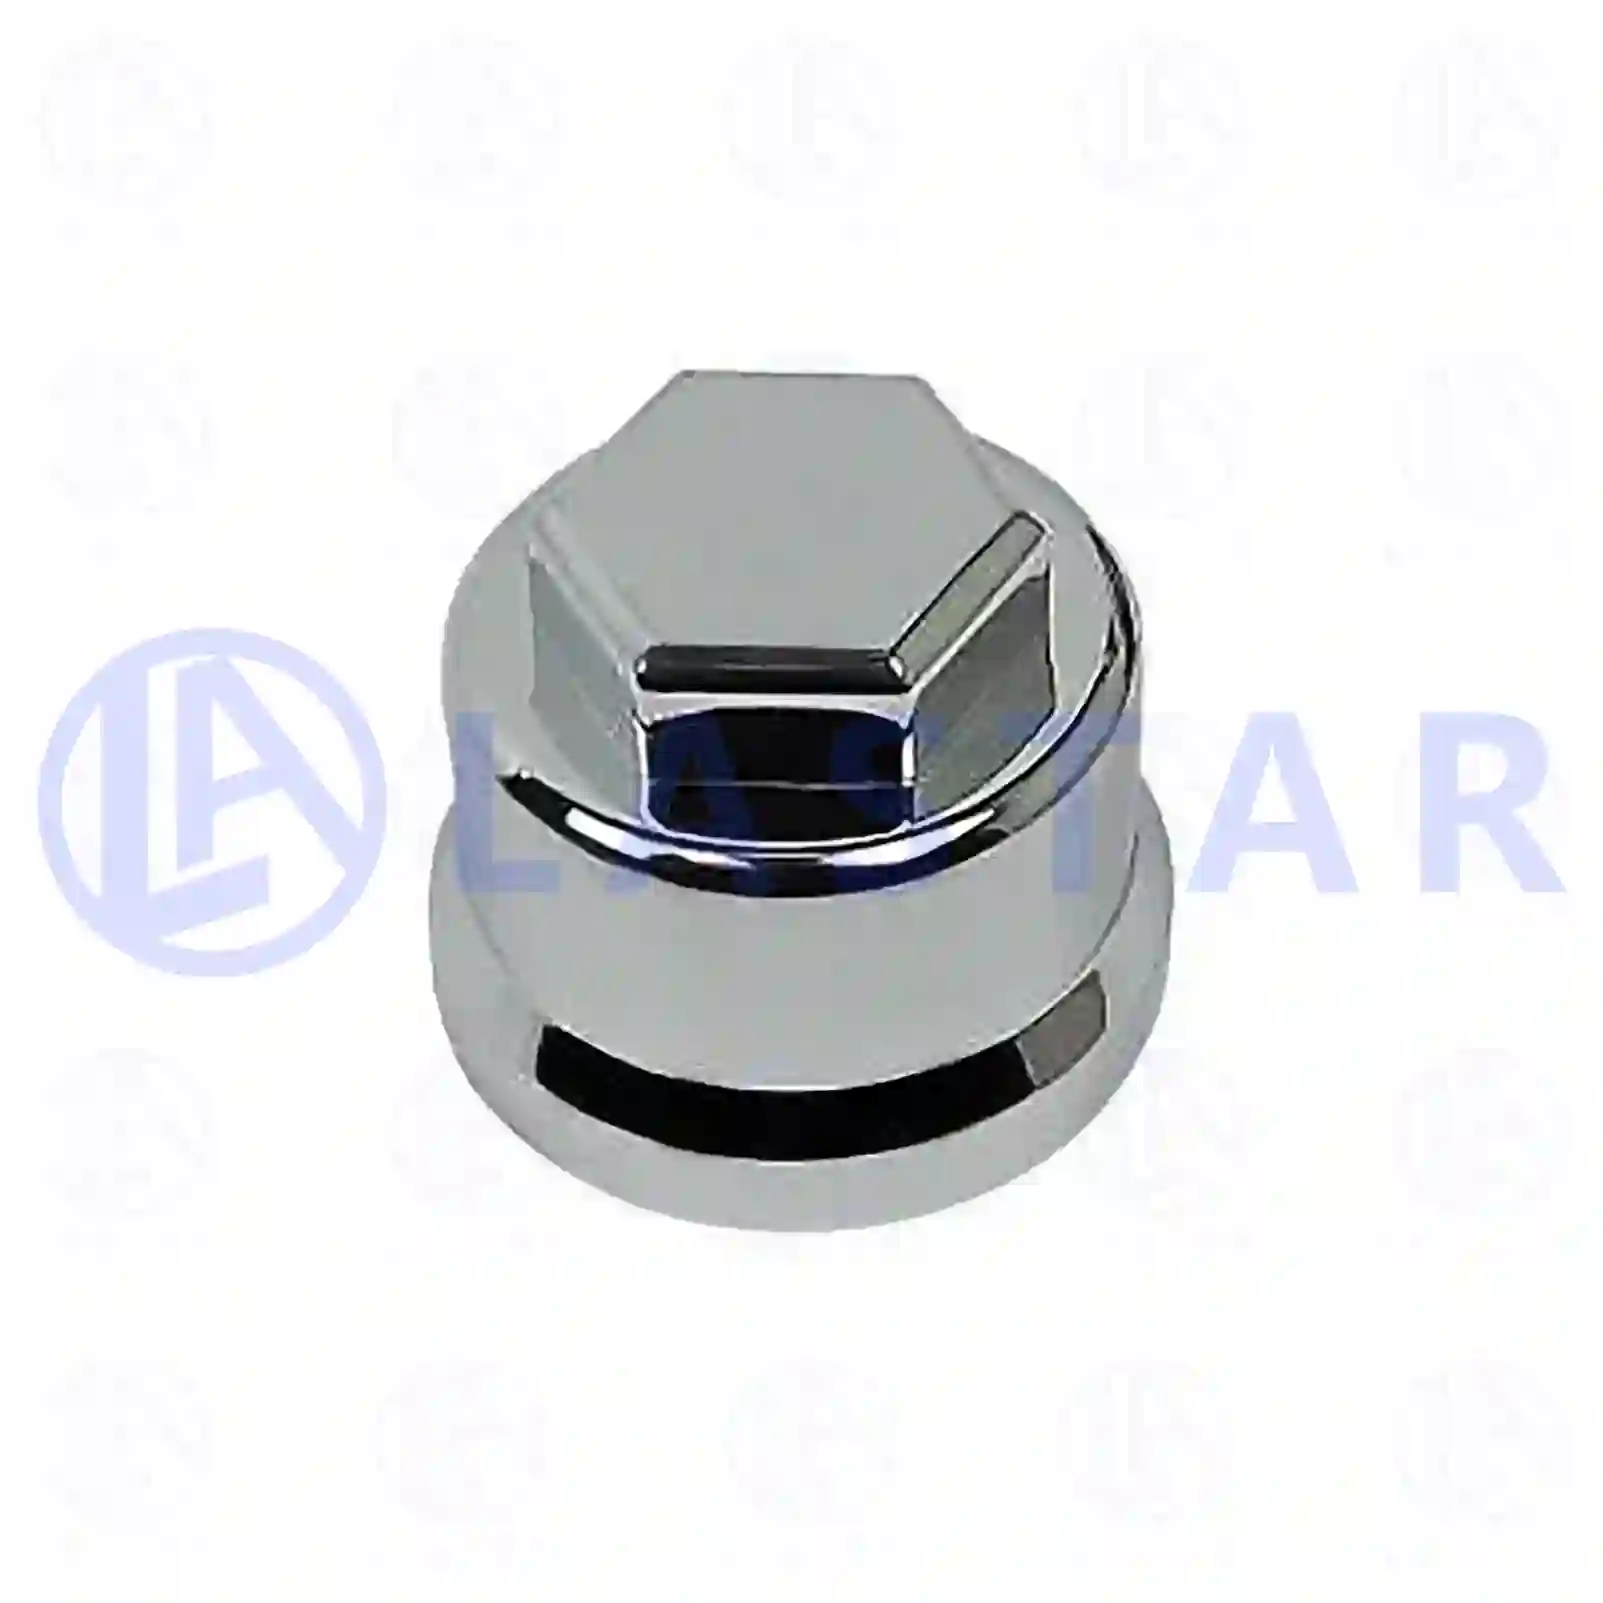 Wheel nut cover, 77726265, 19981323 ||  77726265 Lastar Spare Part | Truck Spare Parts, Auotomotive Spare Parts Wheel nut cover, 77726265, 19981323 ||  77726265 Lastar Spare Part | Truck Spare Parts, Auotomotive Spare Parts